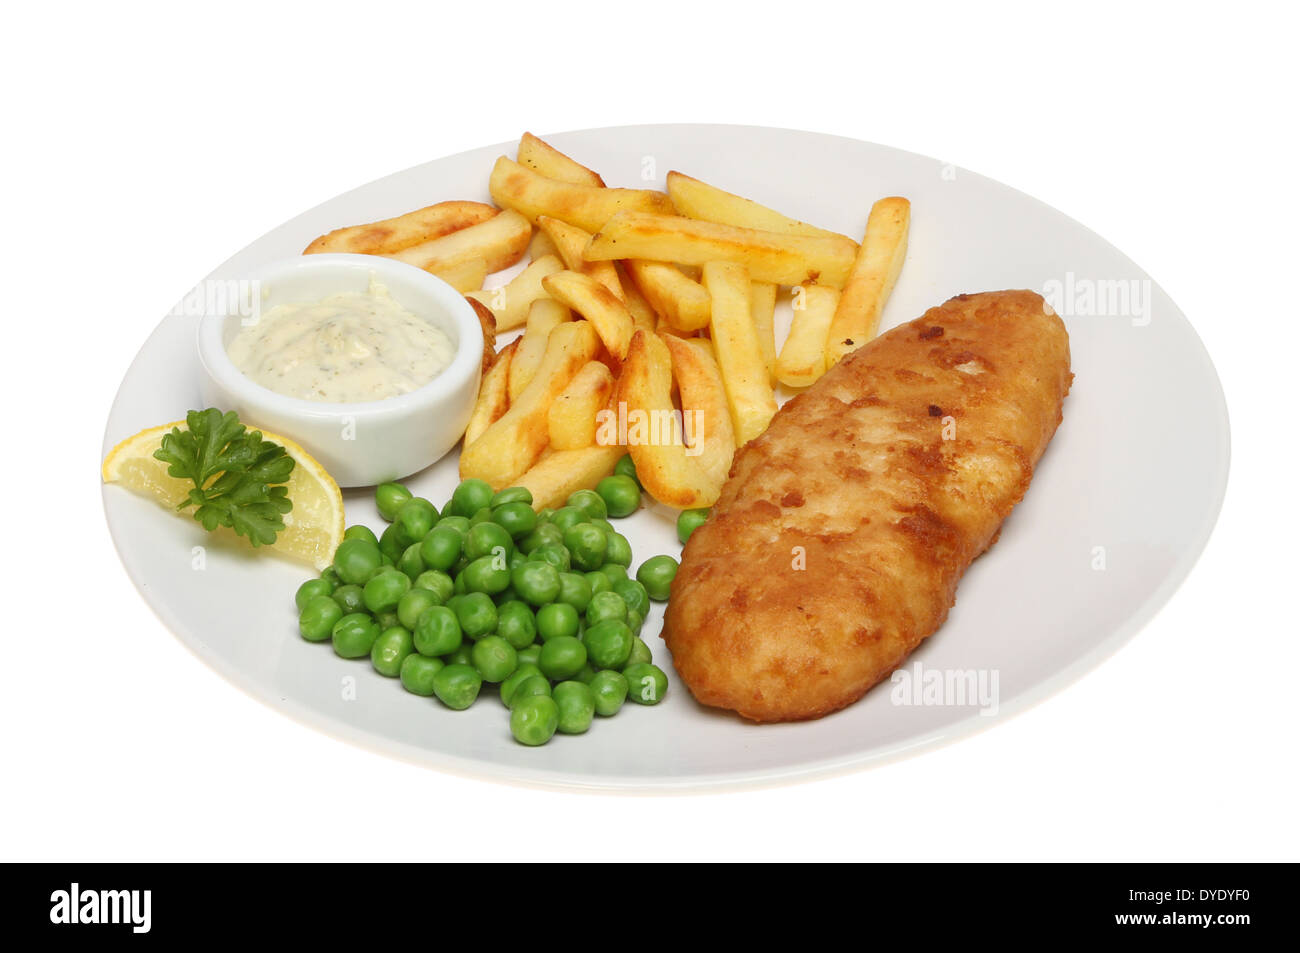 Battered fish, chips and peas with tartar sauce and a garnish of lemon and parsley on a plate isolated against white Stock Photo